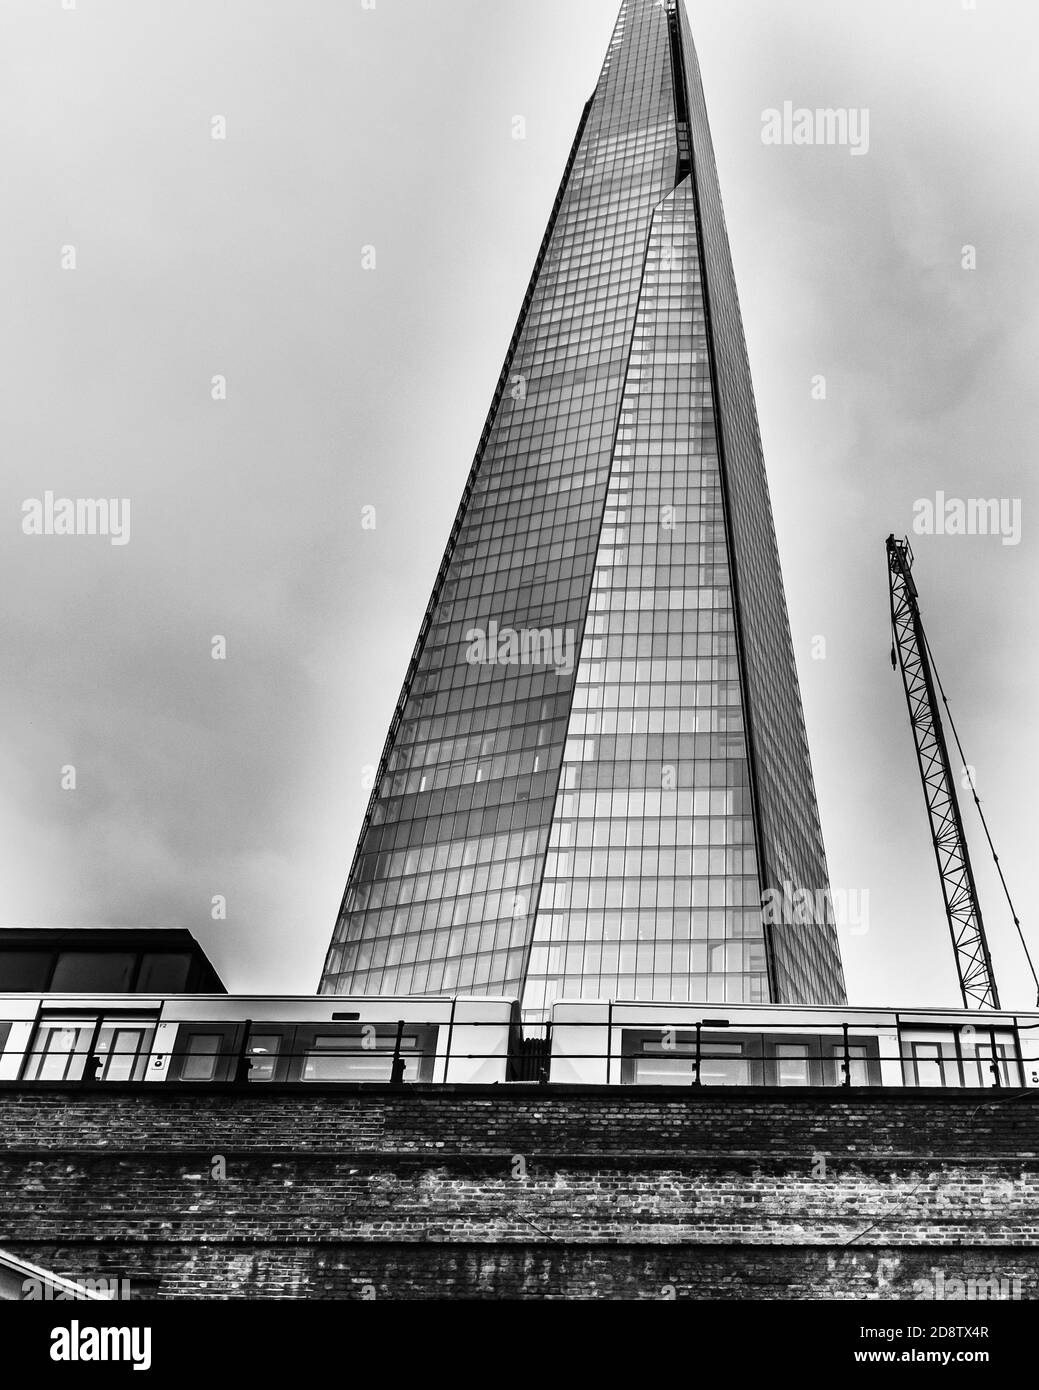 London, UK, December 7, 2013: The Shard behind London Bridge Station against sky, converted in black-and-white Stock Photo